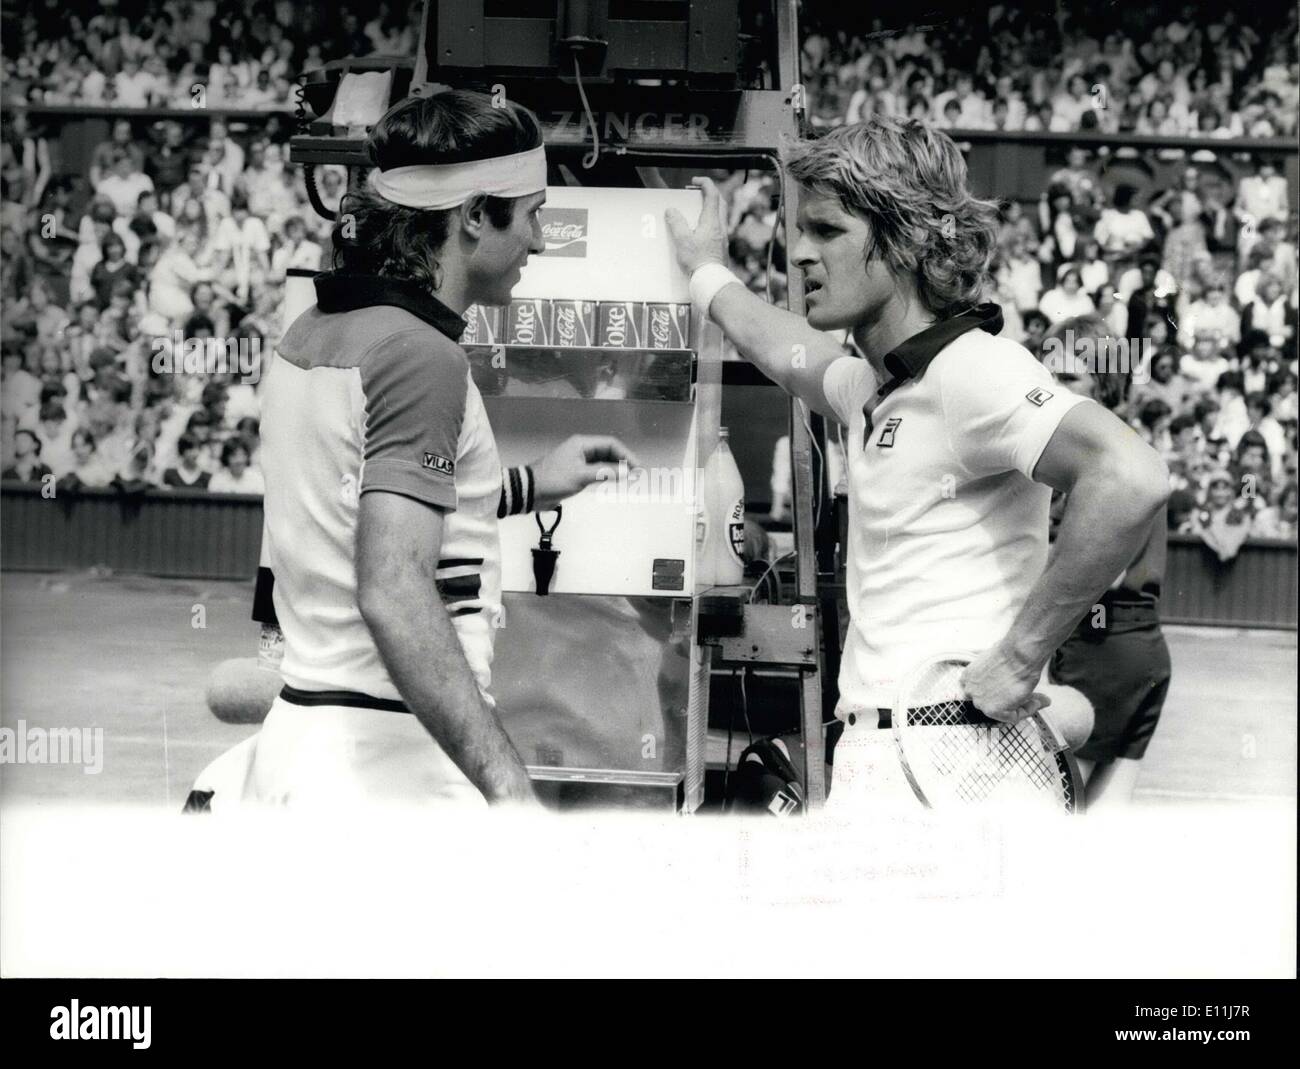 Jul. 11, 1978 - Public star s in Players: About 15,000 members of the public are being featured on screen during the shooting of the film Players currently on location at Wimbledon. The film stars Ali MacGraw and Dean Paul Martin. It is a love story set against the backdrop of the famous Wimbledon Centre Court. In the film Dean Paul Martin, himself a ranked professional player plays the role of a World tennis competitor and in the film he is shown competing against top tennis stars Guillermo Vilan and Ilia Nastase Stock Photo